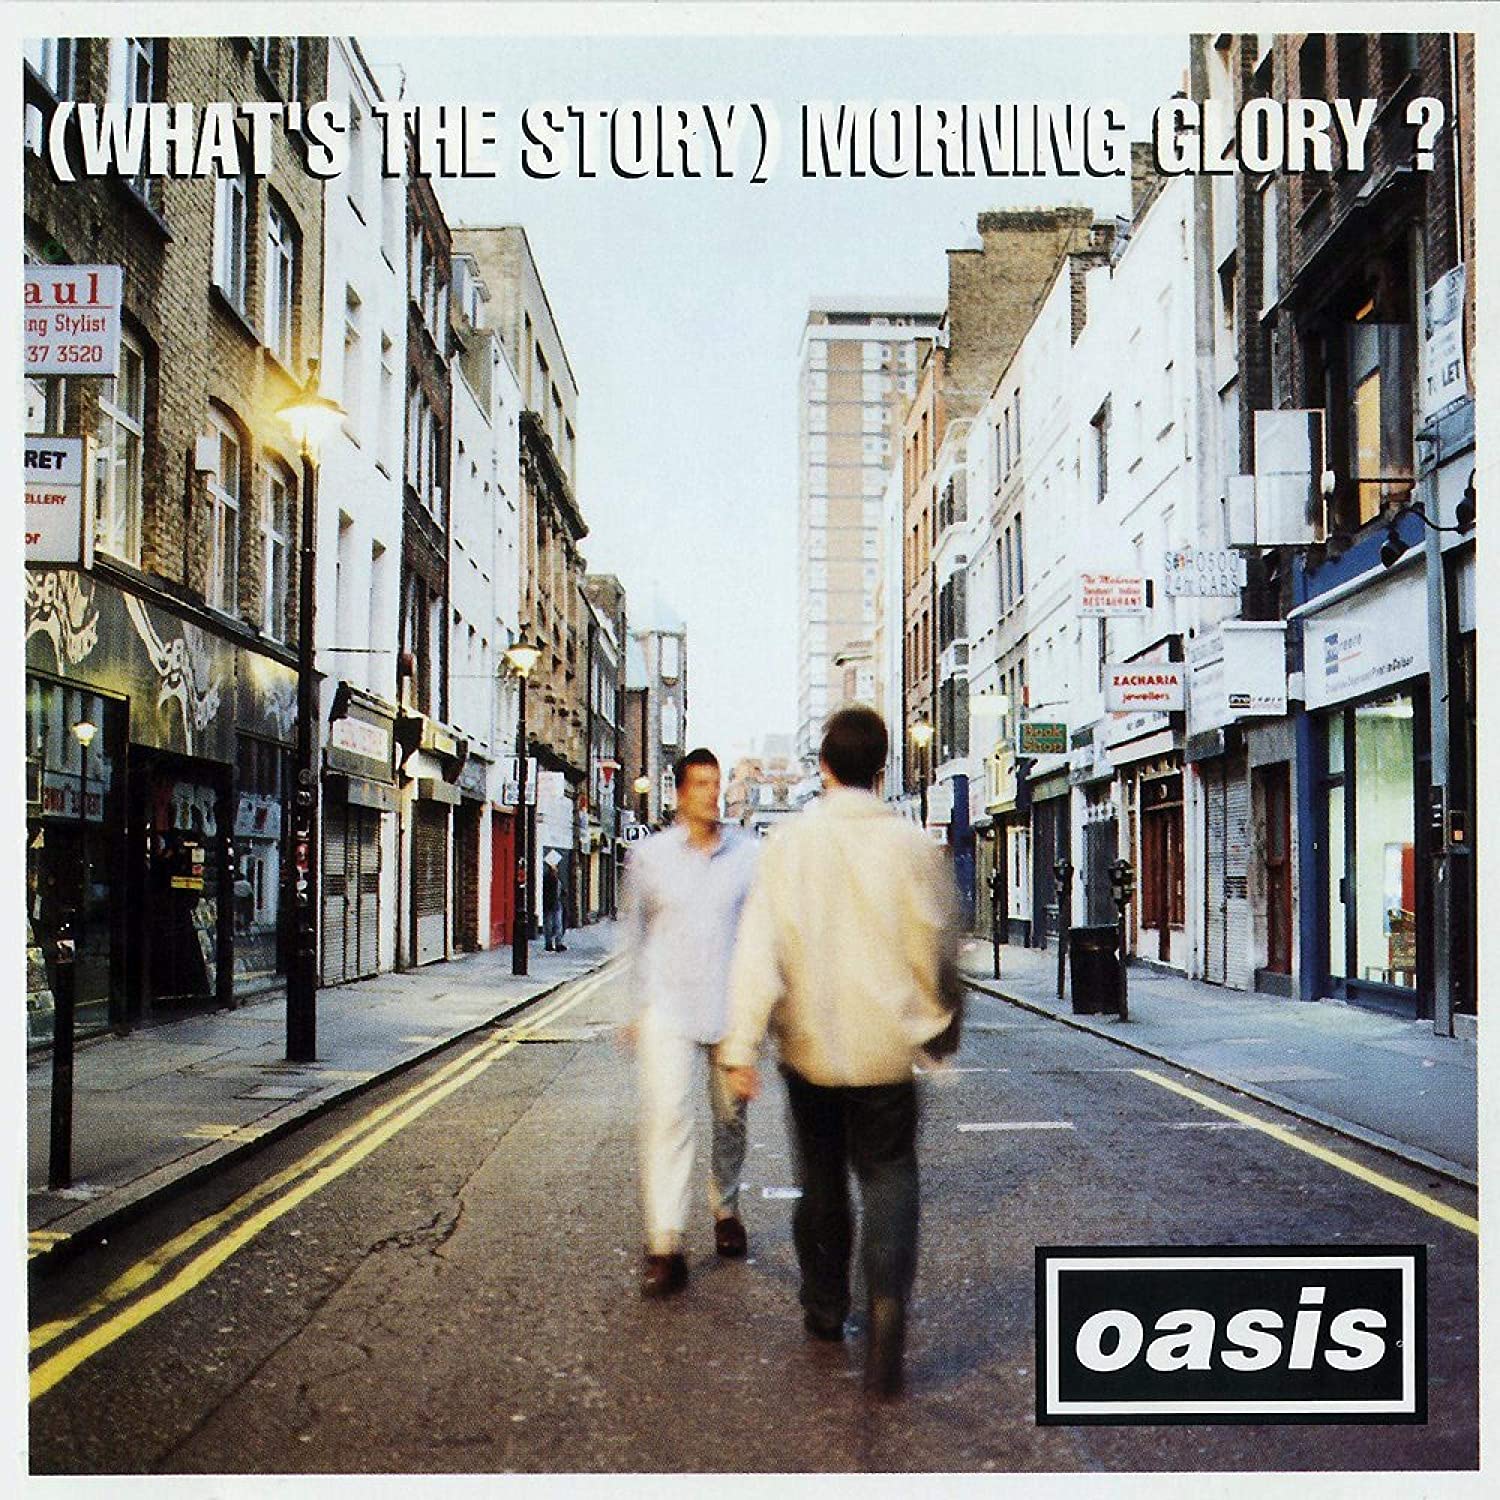 Discos Traducidos: (What’s the Story) Morning Glory? – Oasis